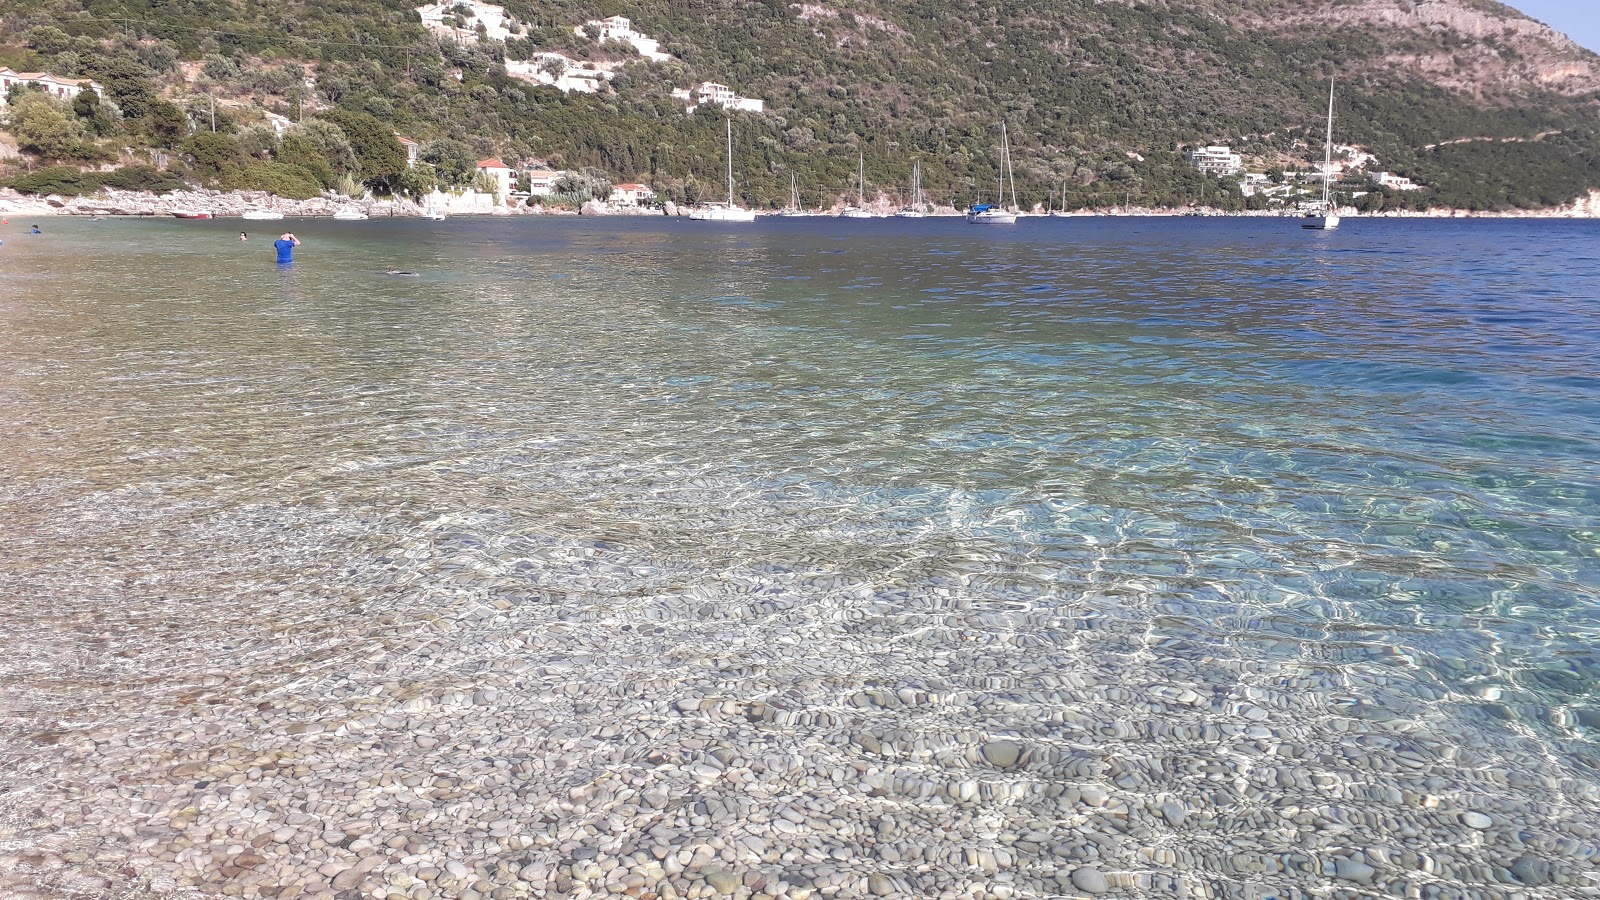 Photo of Mikros Gialos beach and its beautiful scenery